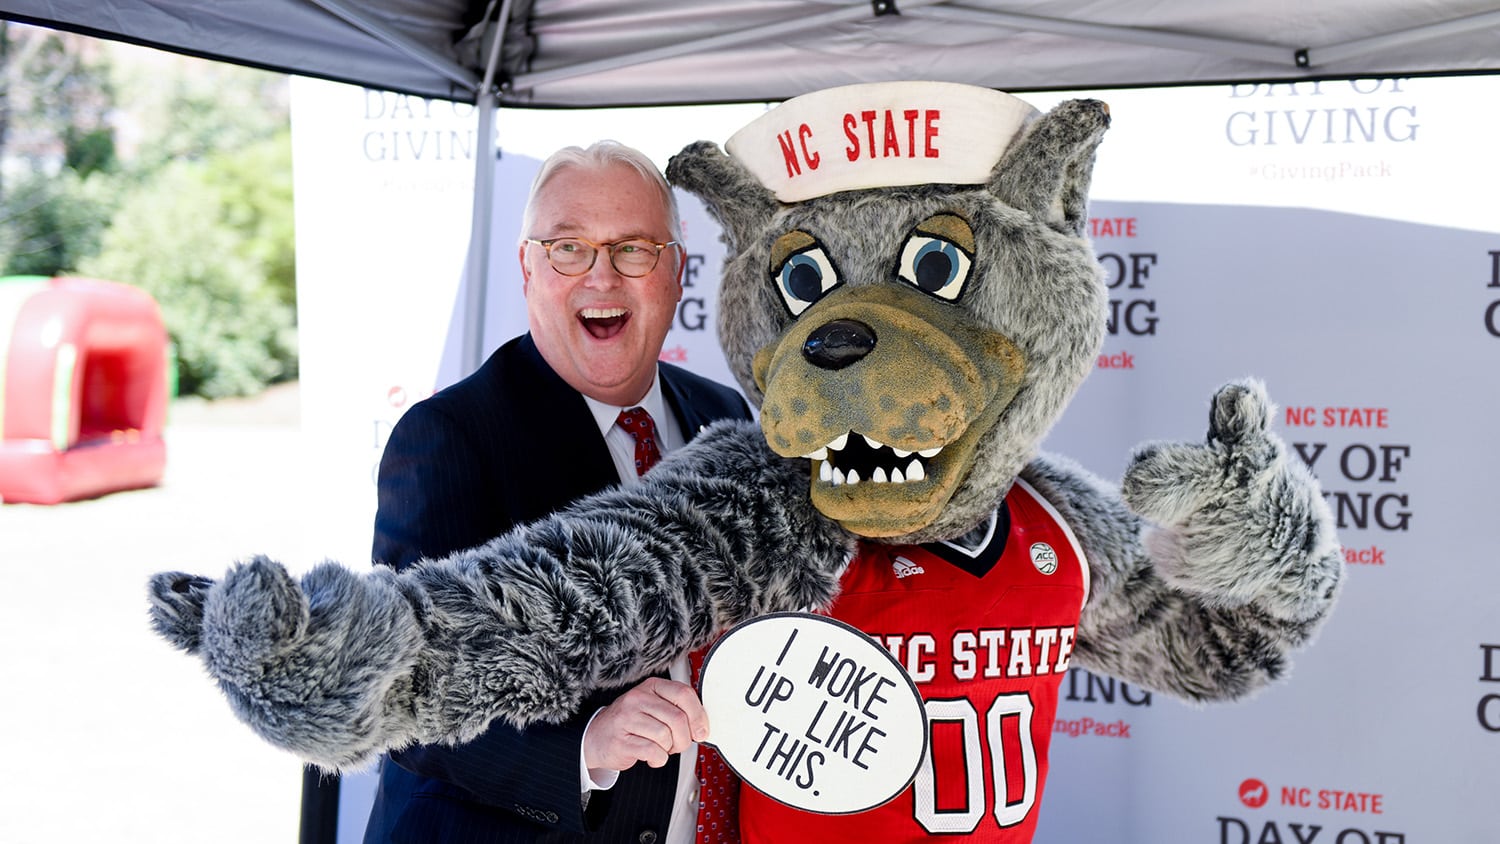 Chancellor Woodson poses for a photo with Mr. Wuf holding a sign that says "I woke up like this" during the 2019 Day of Giving student event